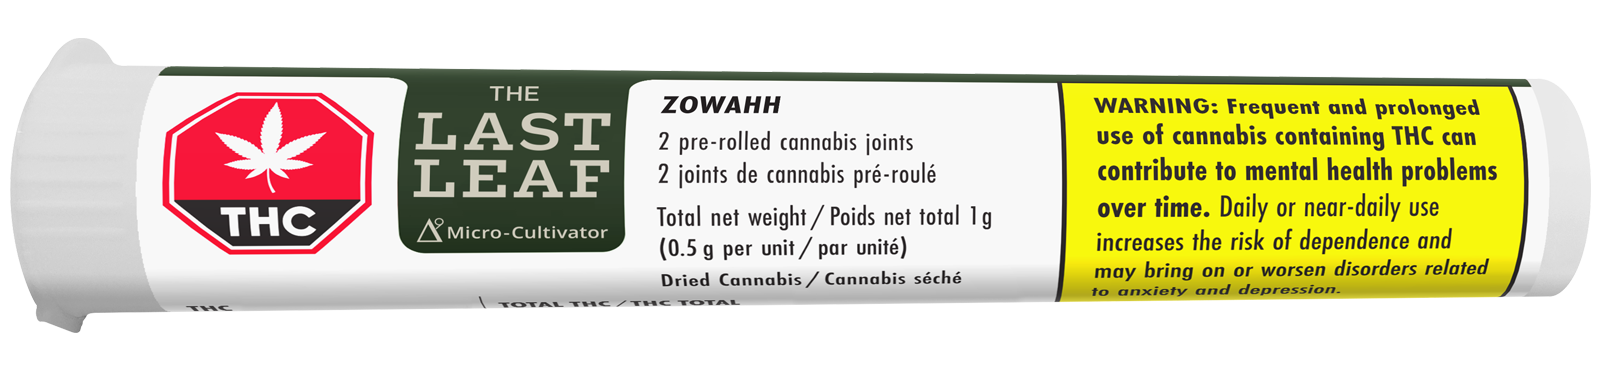 The Last Leaf - Pre-Rolled Zowahh